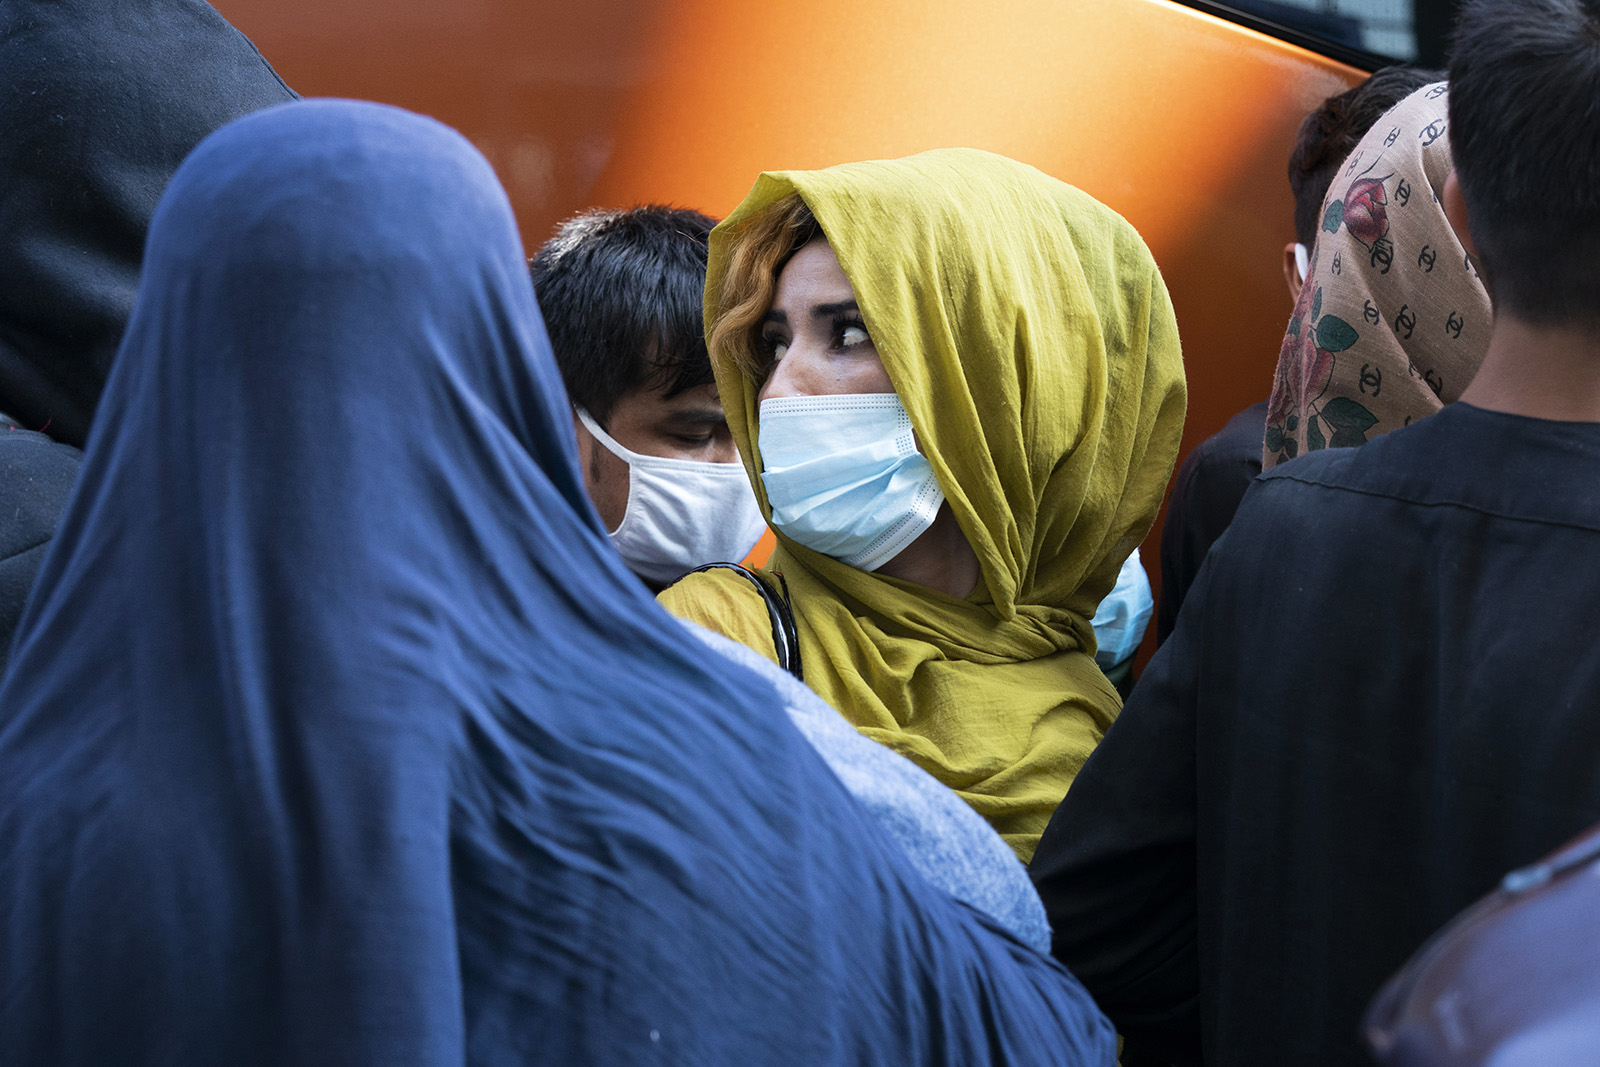 People evacuated from Kabul, Afghanistan, wait to board a bus after they arrived at Washington Dulles International Airport, in Chantilly, Va., on Wednesday, Aug. 25, 2021. (AP Photo/Jose Luis Magana)